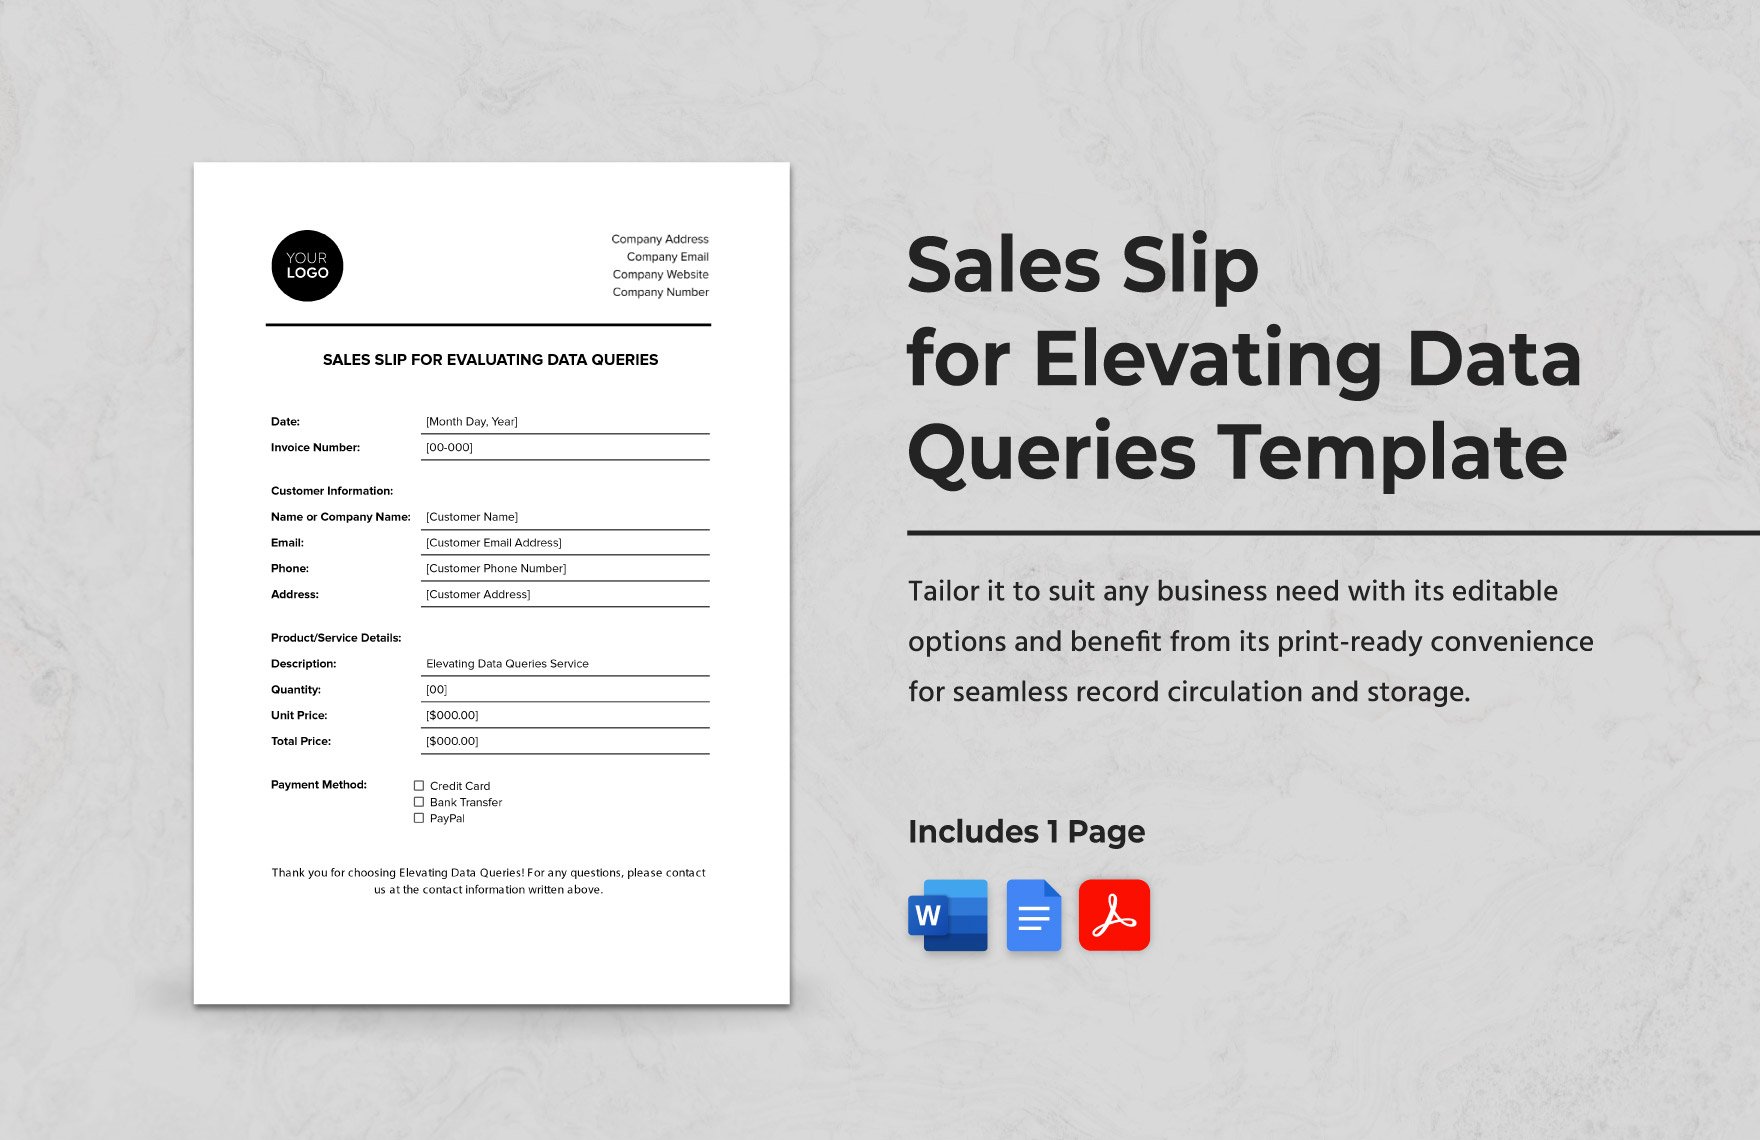 Sales Slip for Elevating Data Queries Template in Word, Google Docs, PDF